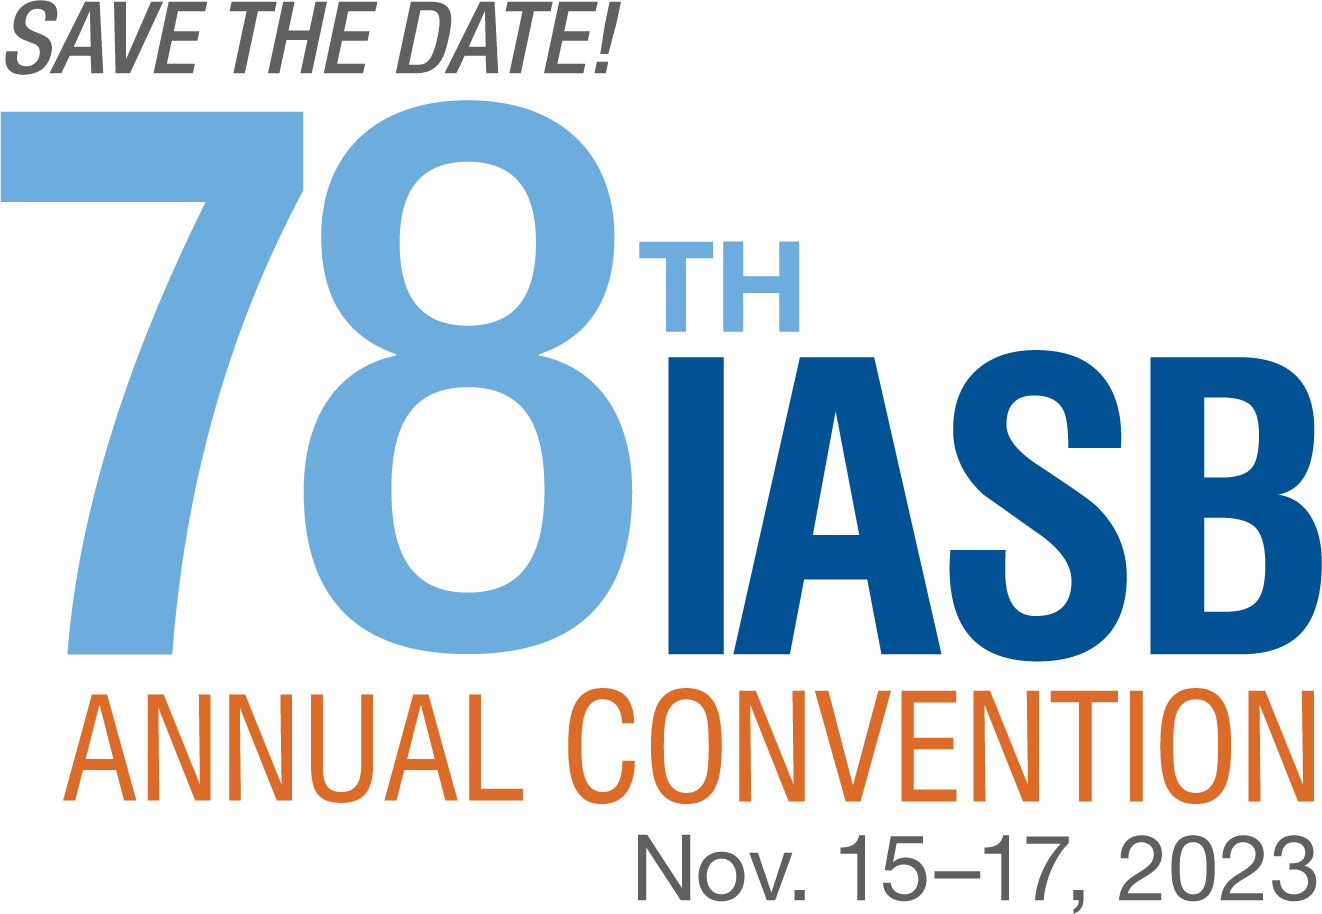 Save the date for our 77th IASB Annual Convention!